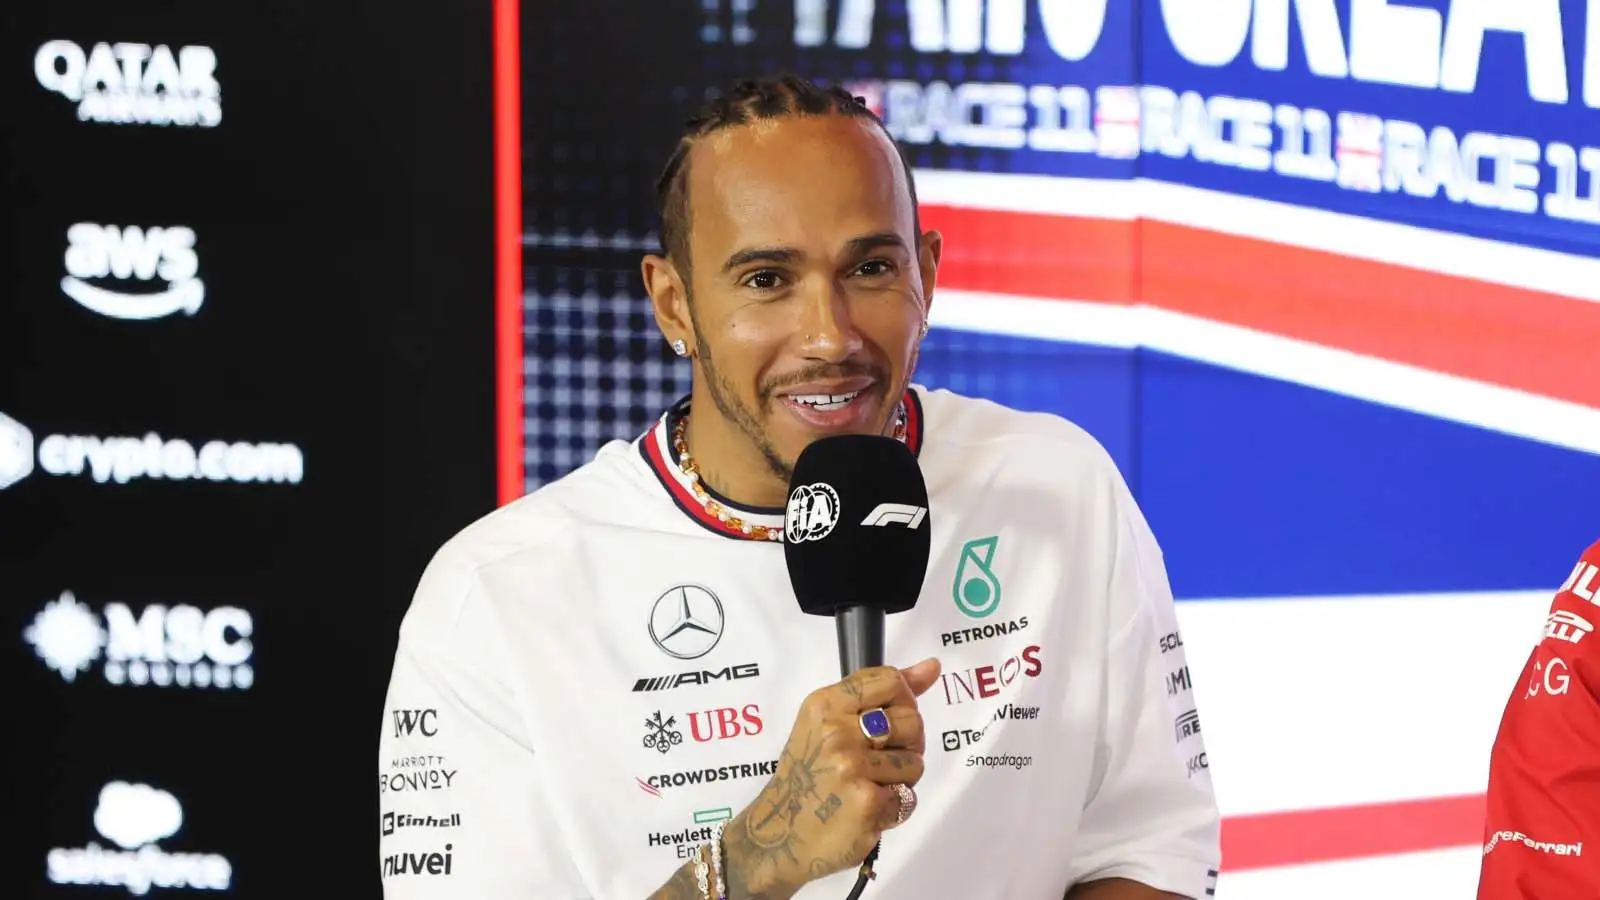 Lewis Hamilton triggers Mercedes reprimand before home race weekend begins  : PlanetF1